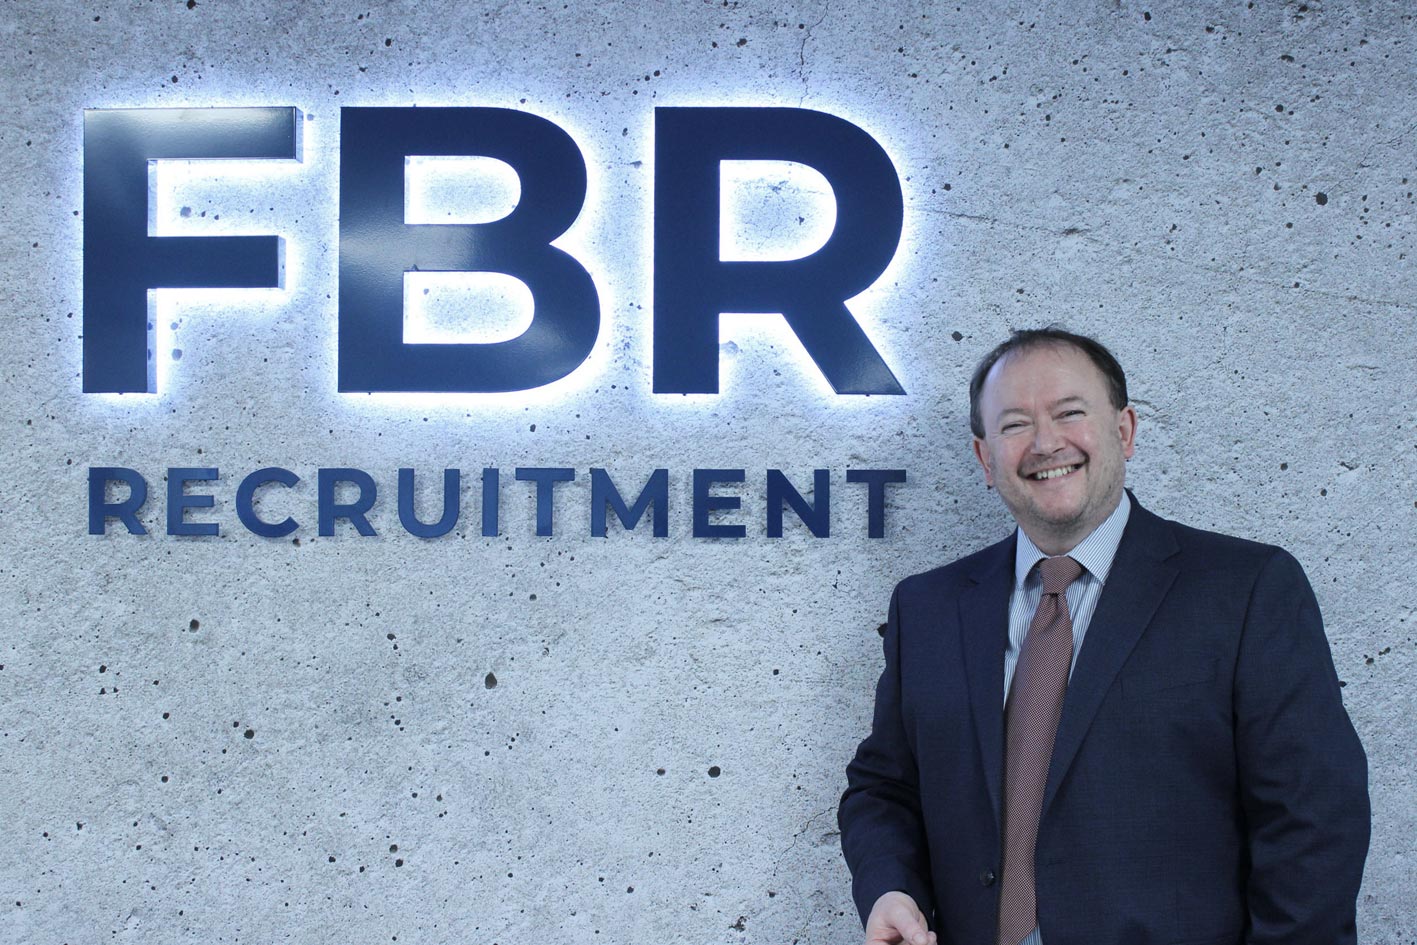 Mark Ritchie, a Director at FBR, specialises in recruitment for Main Contractors & Civil Engineers (permanent and temporary roles).